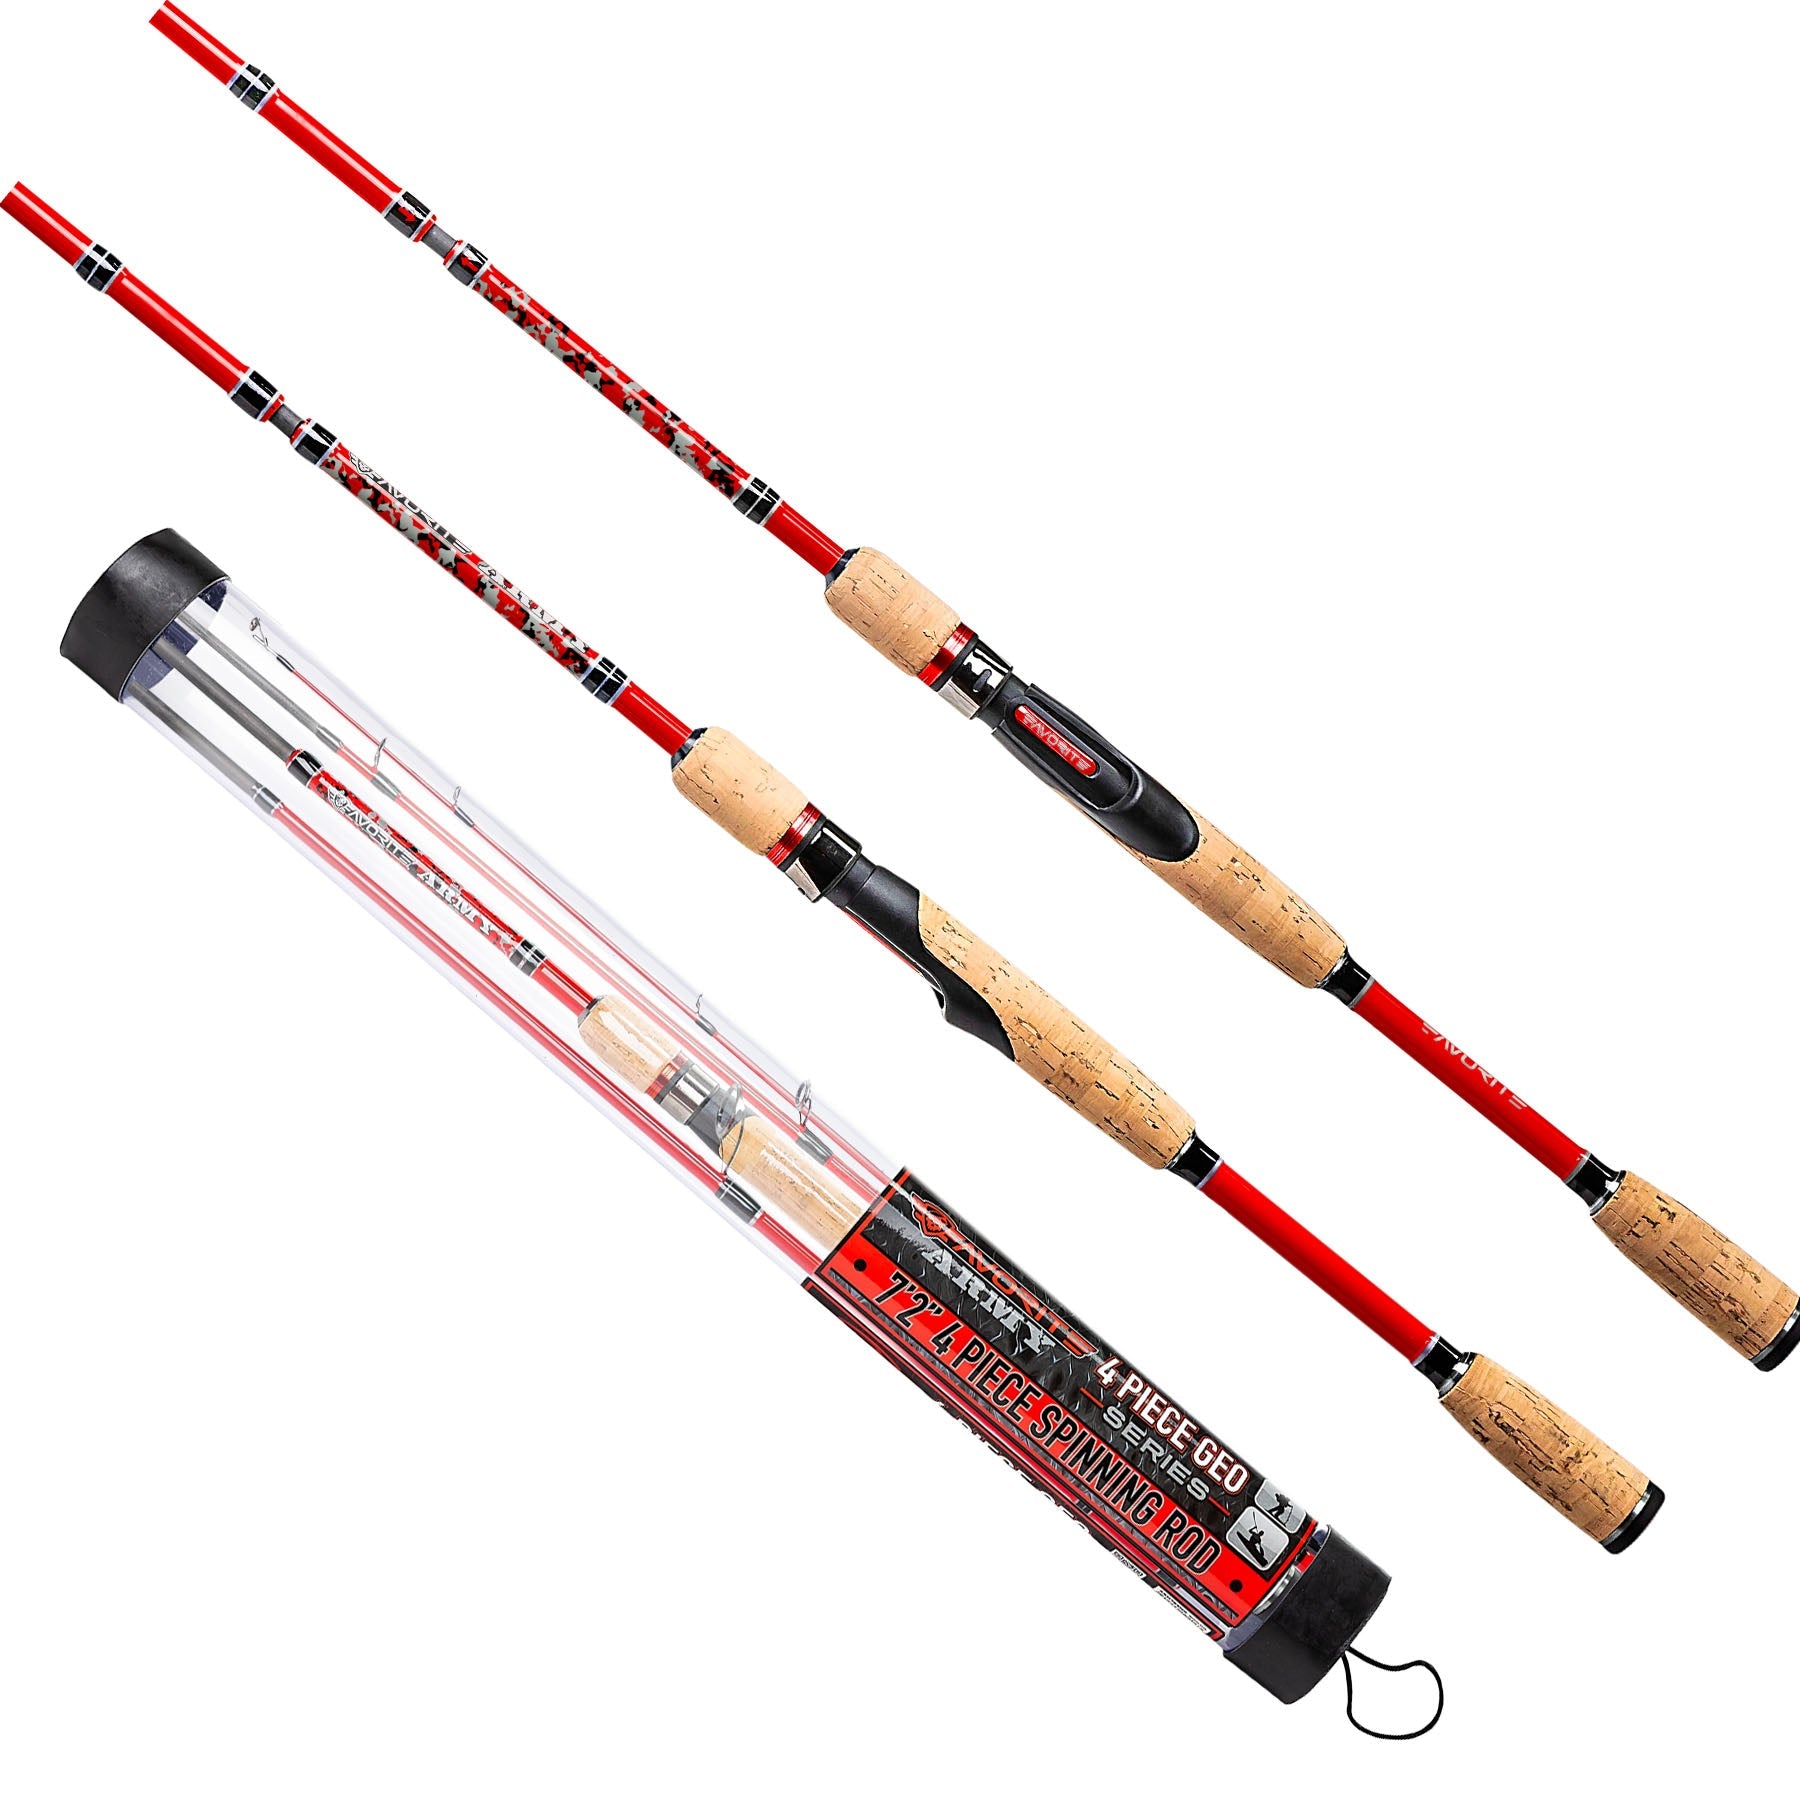 My travel fishing combo Stradic 1000 and Savage Gear 4pc Rod. Nice and  light and fits in my carry on luggage : r/Fishing_Gear